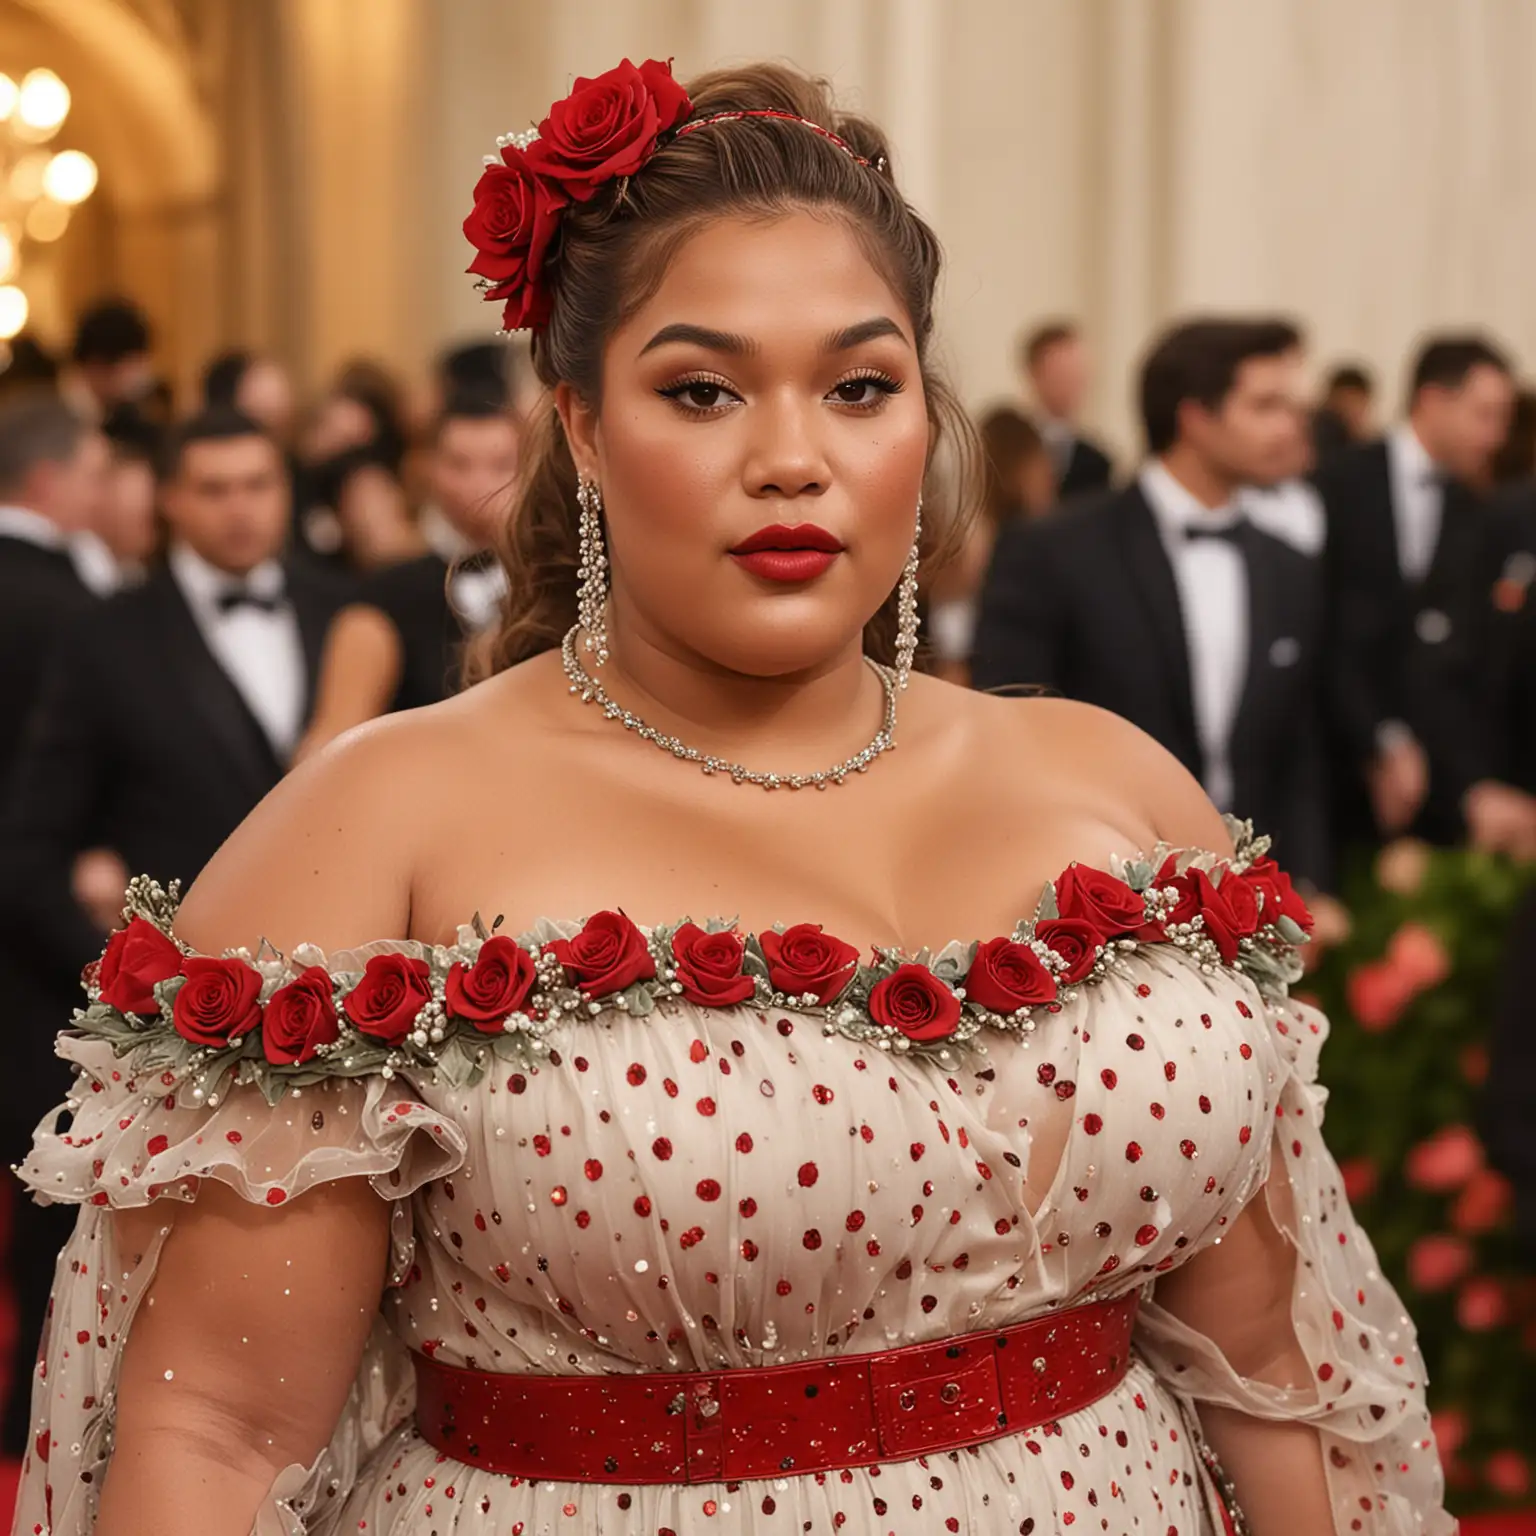 A stylish plus-sized woman with caramel skin at the Met Gala. She is wearing an ethereal, high-fashion, flowing l, off-the-shoulder polka-dot gown with red roses, in red, red roses cinched at the waist, with a statement belt, accessorized with bold jewelry, and a classic red lip. Her gorgeous half up hairstyle is framing her gorgeous face and emphasizing her fashion-forward style. 